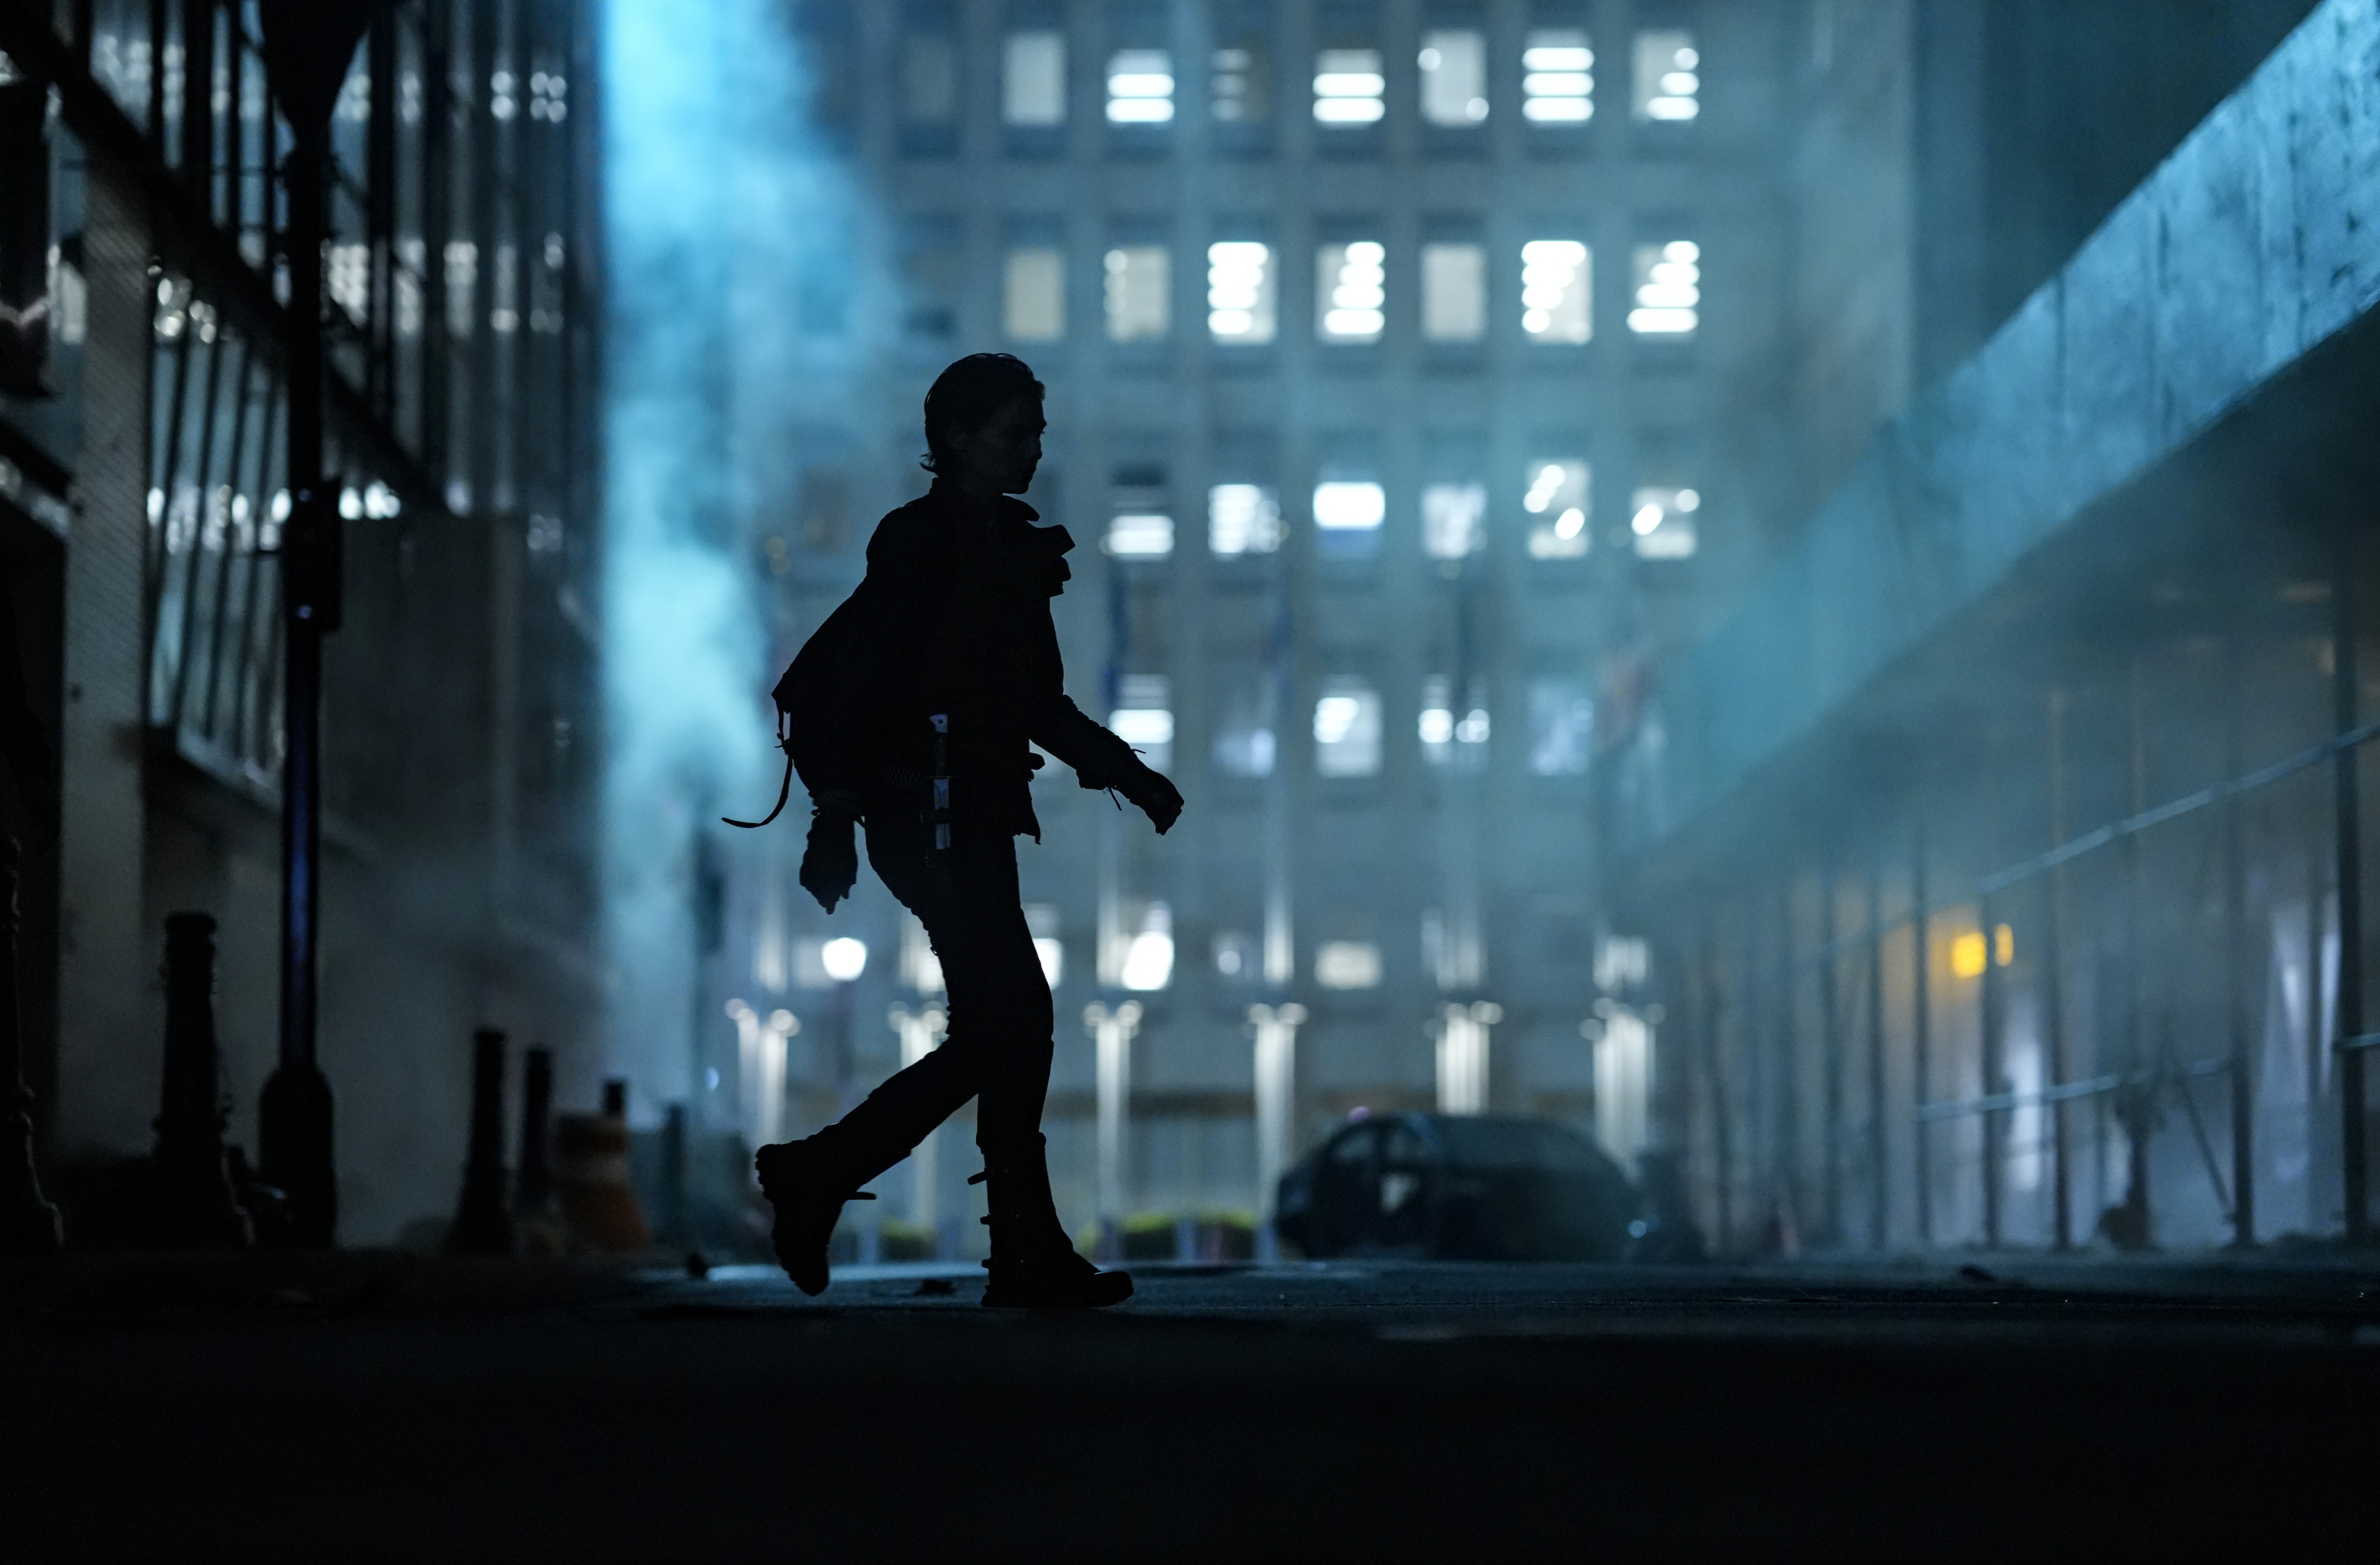 Lauren Cohan as Maggie in a scene from AMC's 'The Walking Dead: Dead City.' We only see Maggie in full-body silhouette as she walks across a street in downtown New York. She is illuminated by the bluish light coming from a still-functioning streetlamp at the end of the street in the distance.